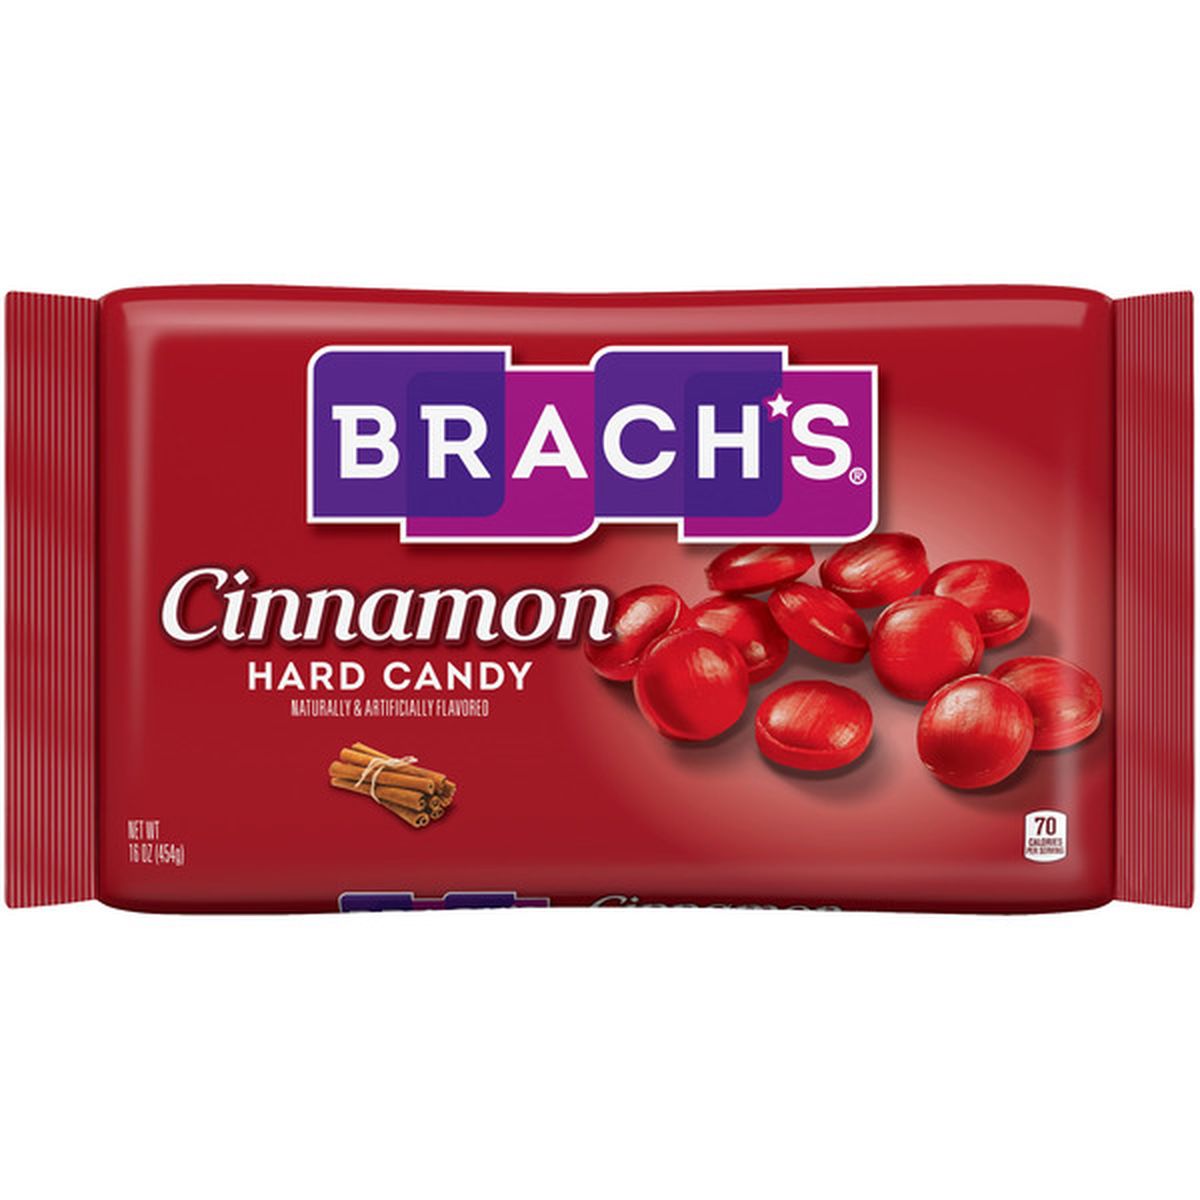 Brach's Cinnamon Hard Candy (16 oz) Delivery or Pickup Near Me - Instacart